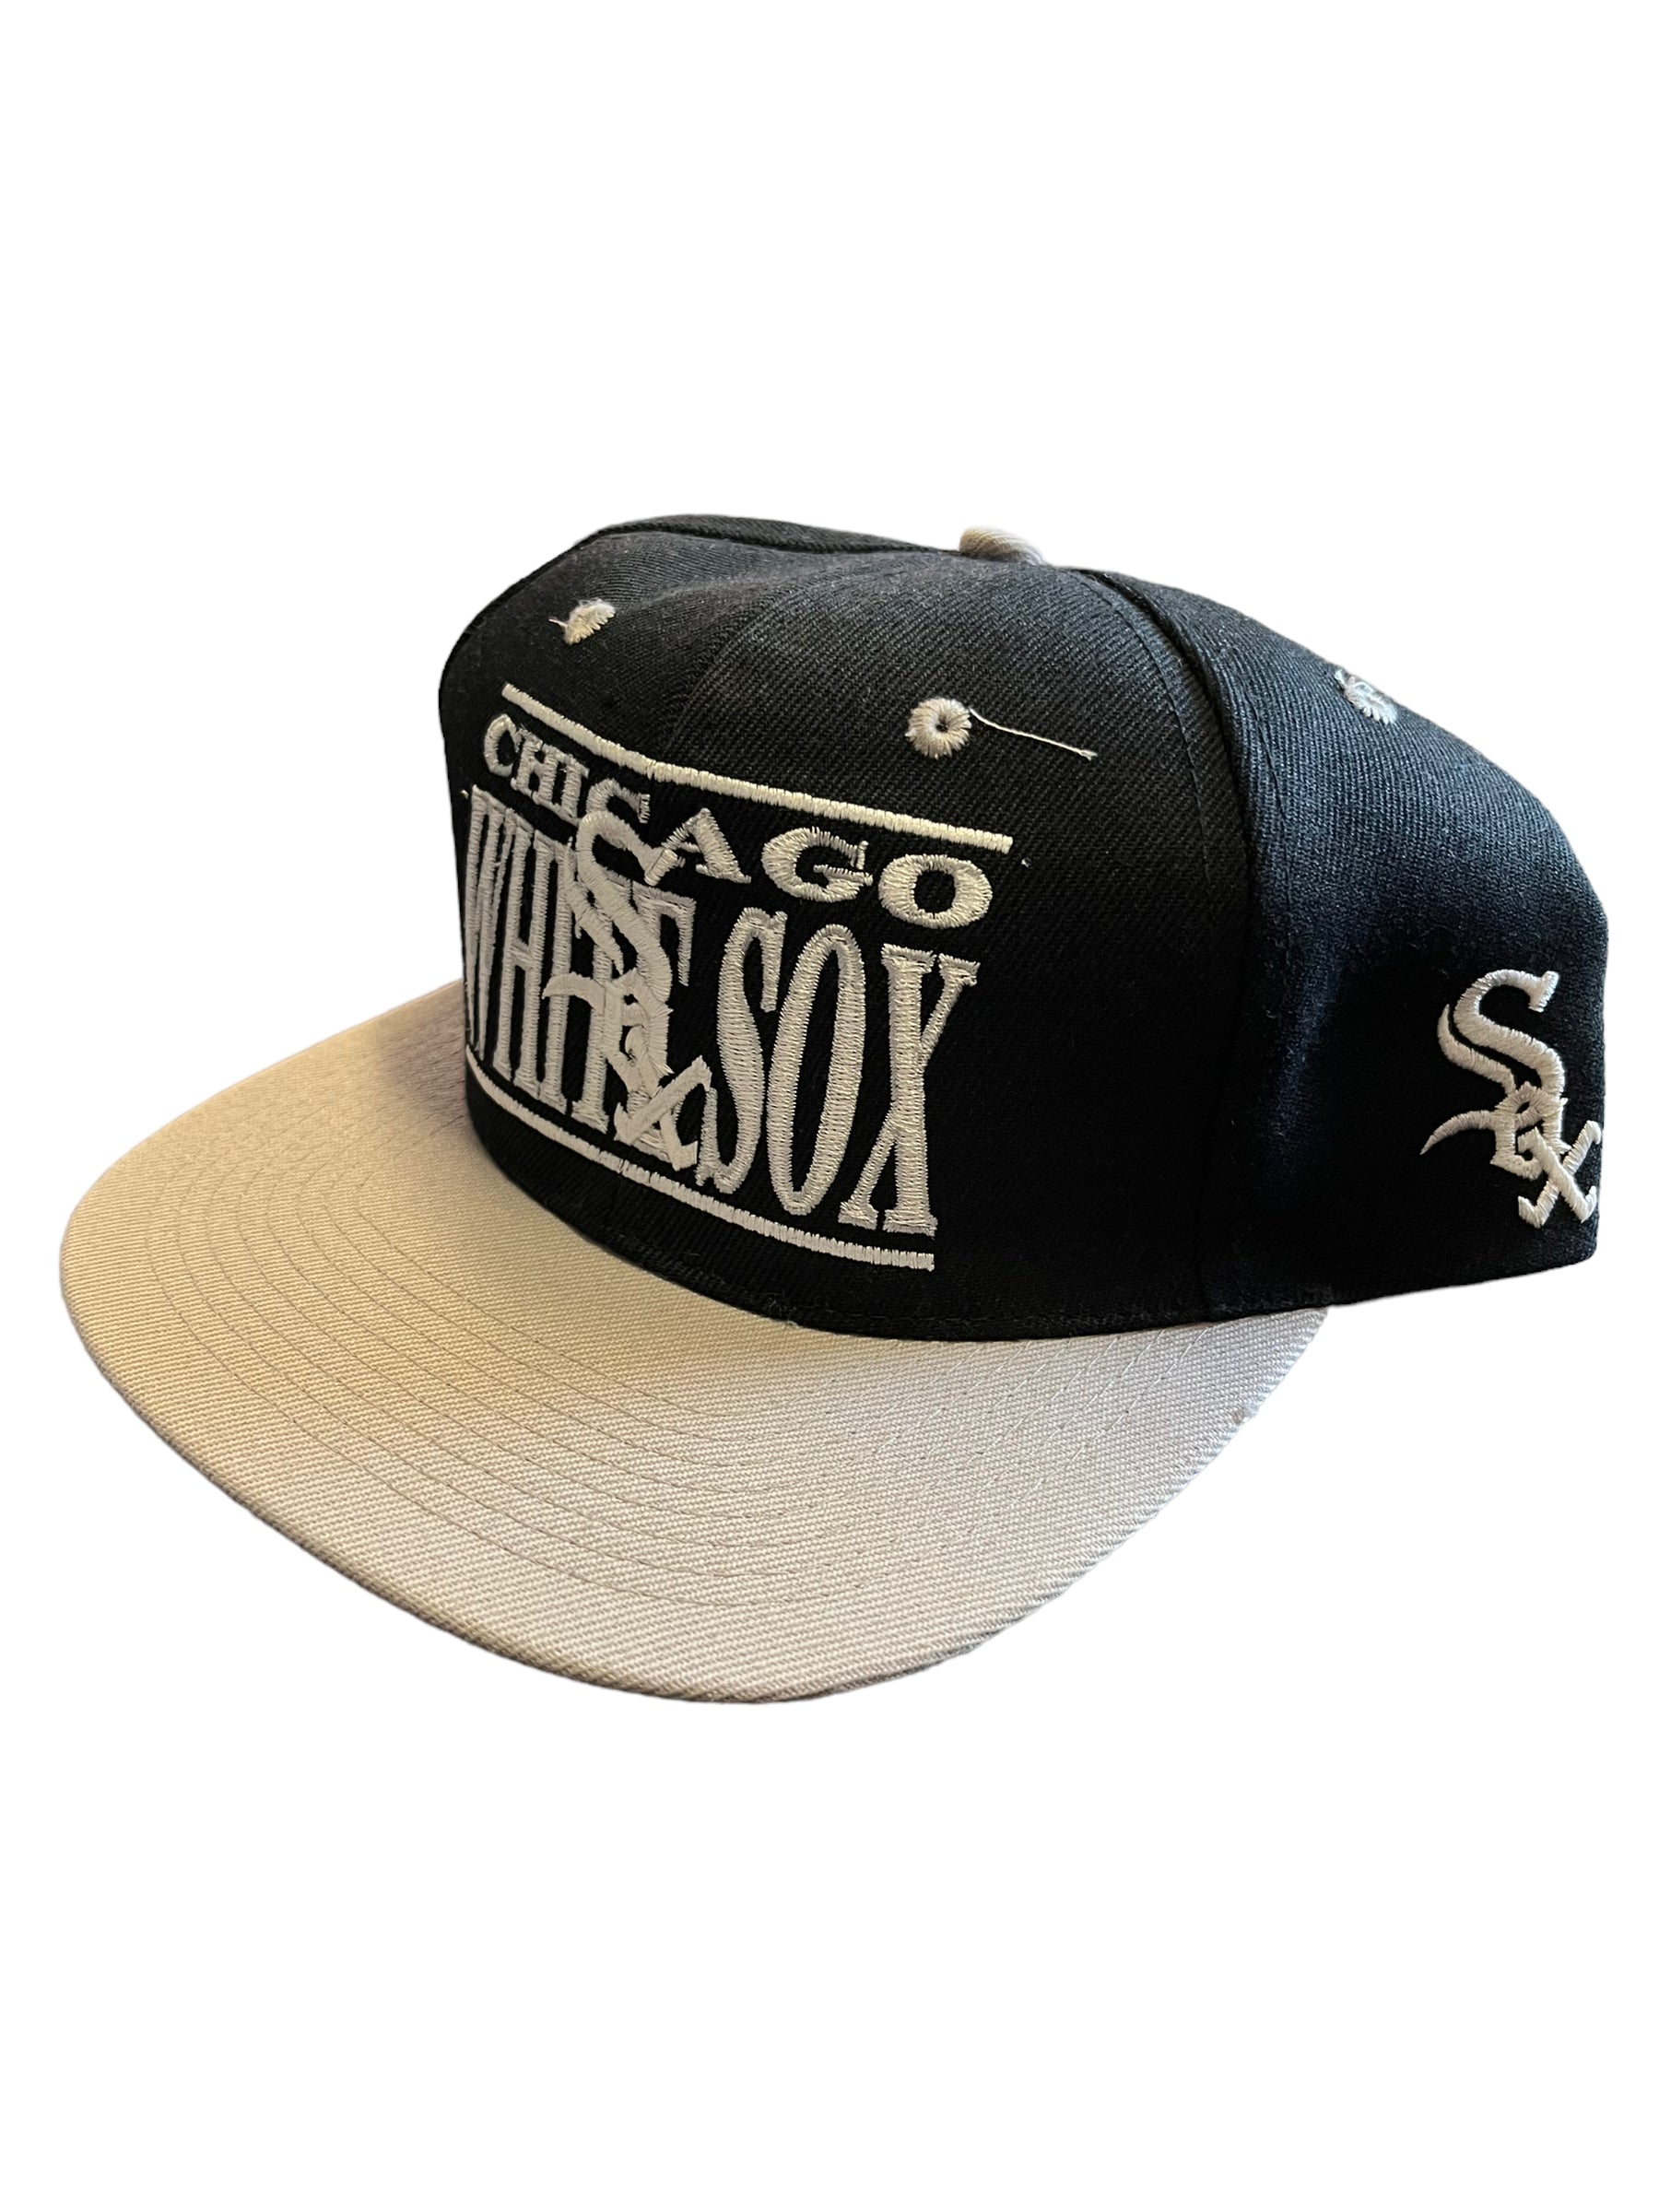 Vintage NEW Chicago White Sox Hat – The Closet